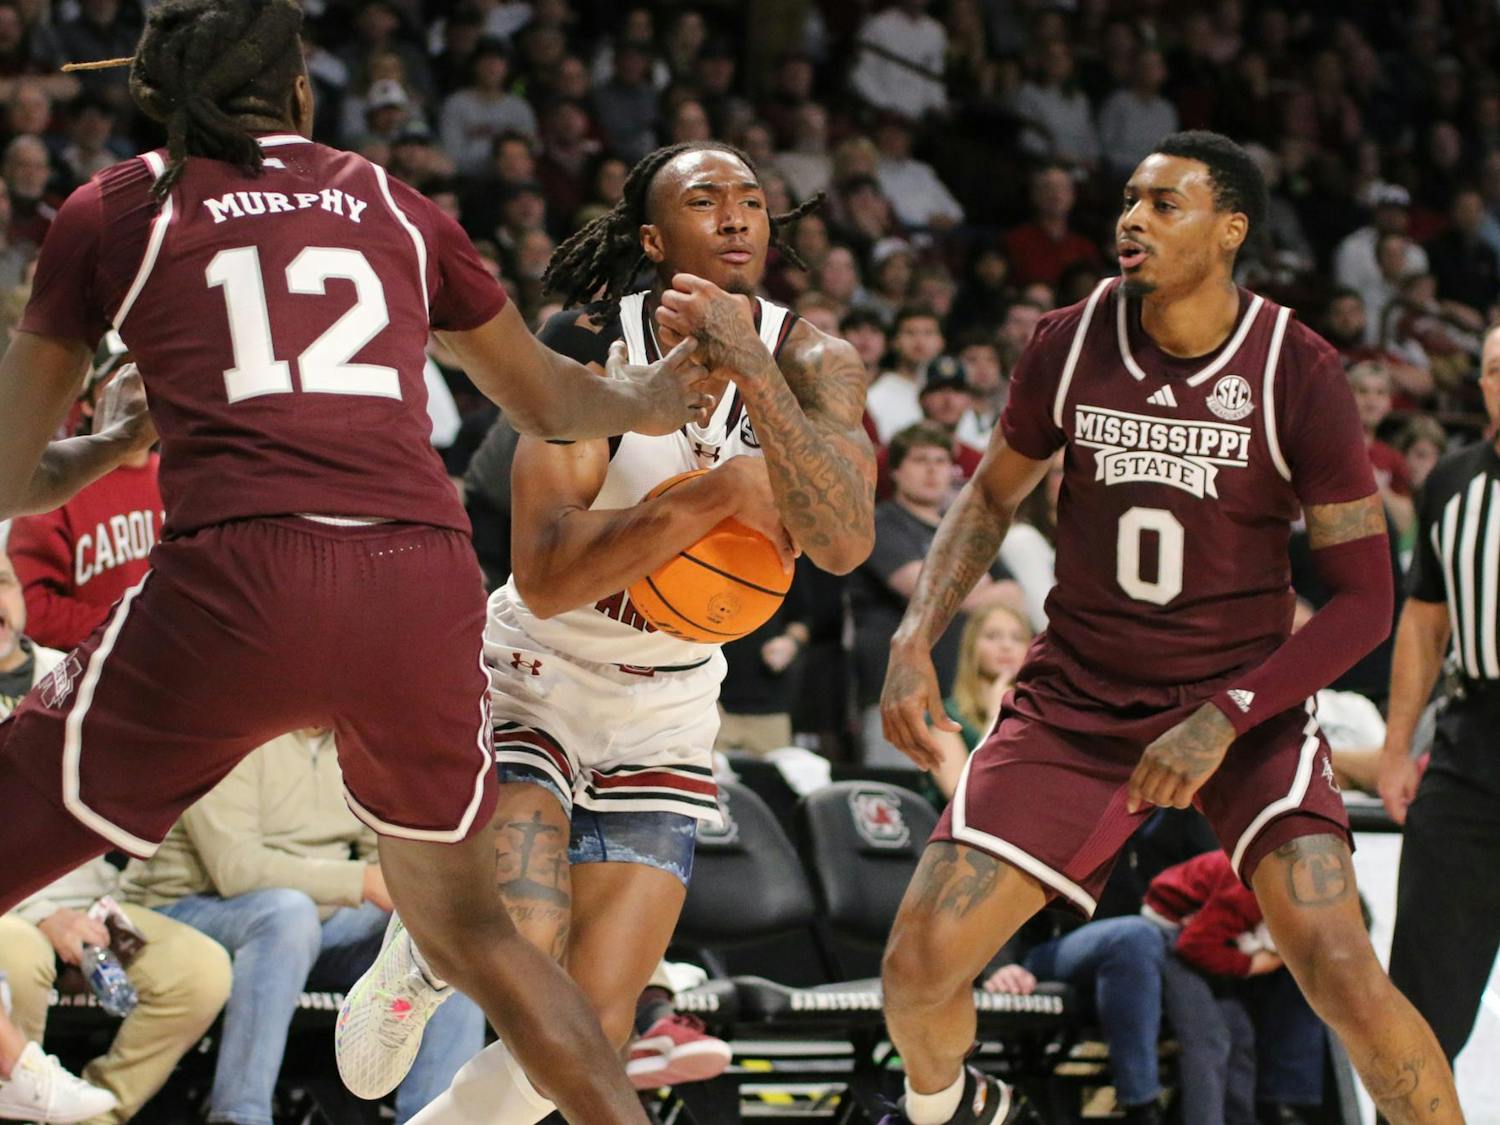 Sophomore guard Zachary Davis tucks the ball in to get past a double team on Jan. 6, 2024. Davis finished the game with 9 points, aiding the 68-62 win against Mississippi State.